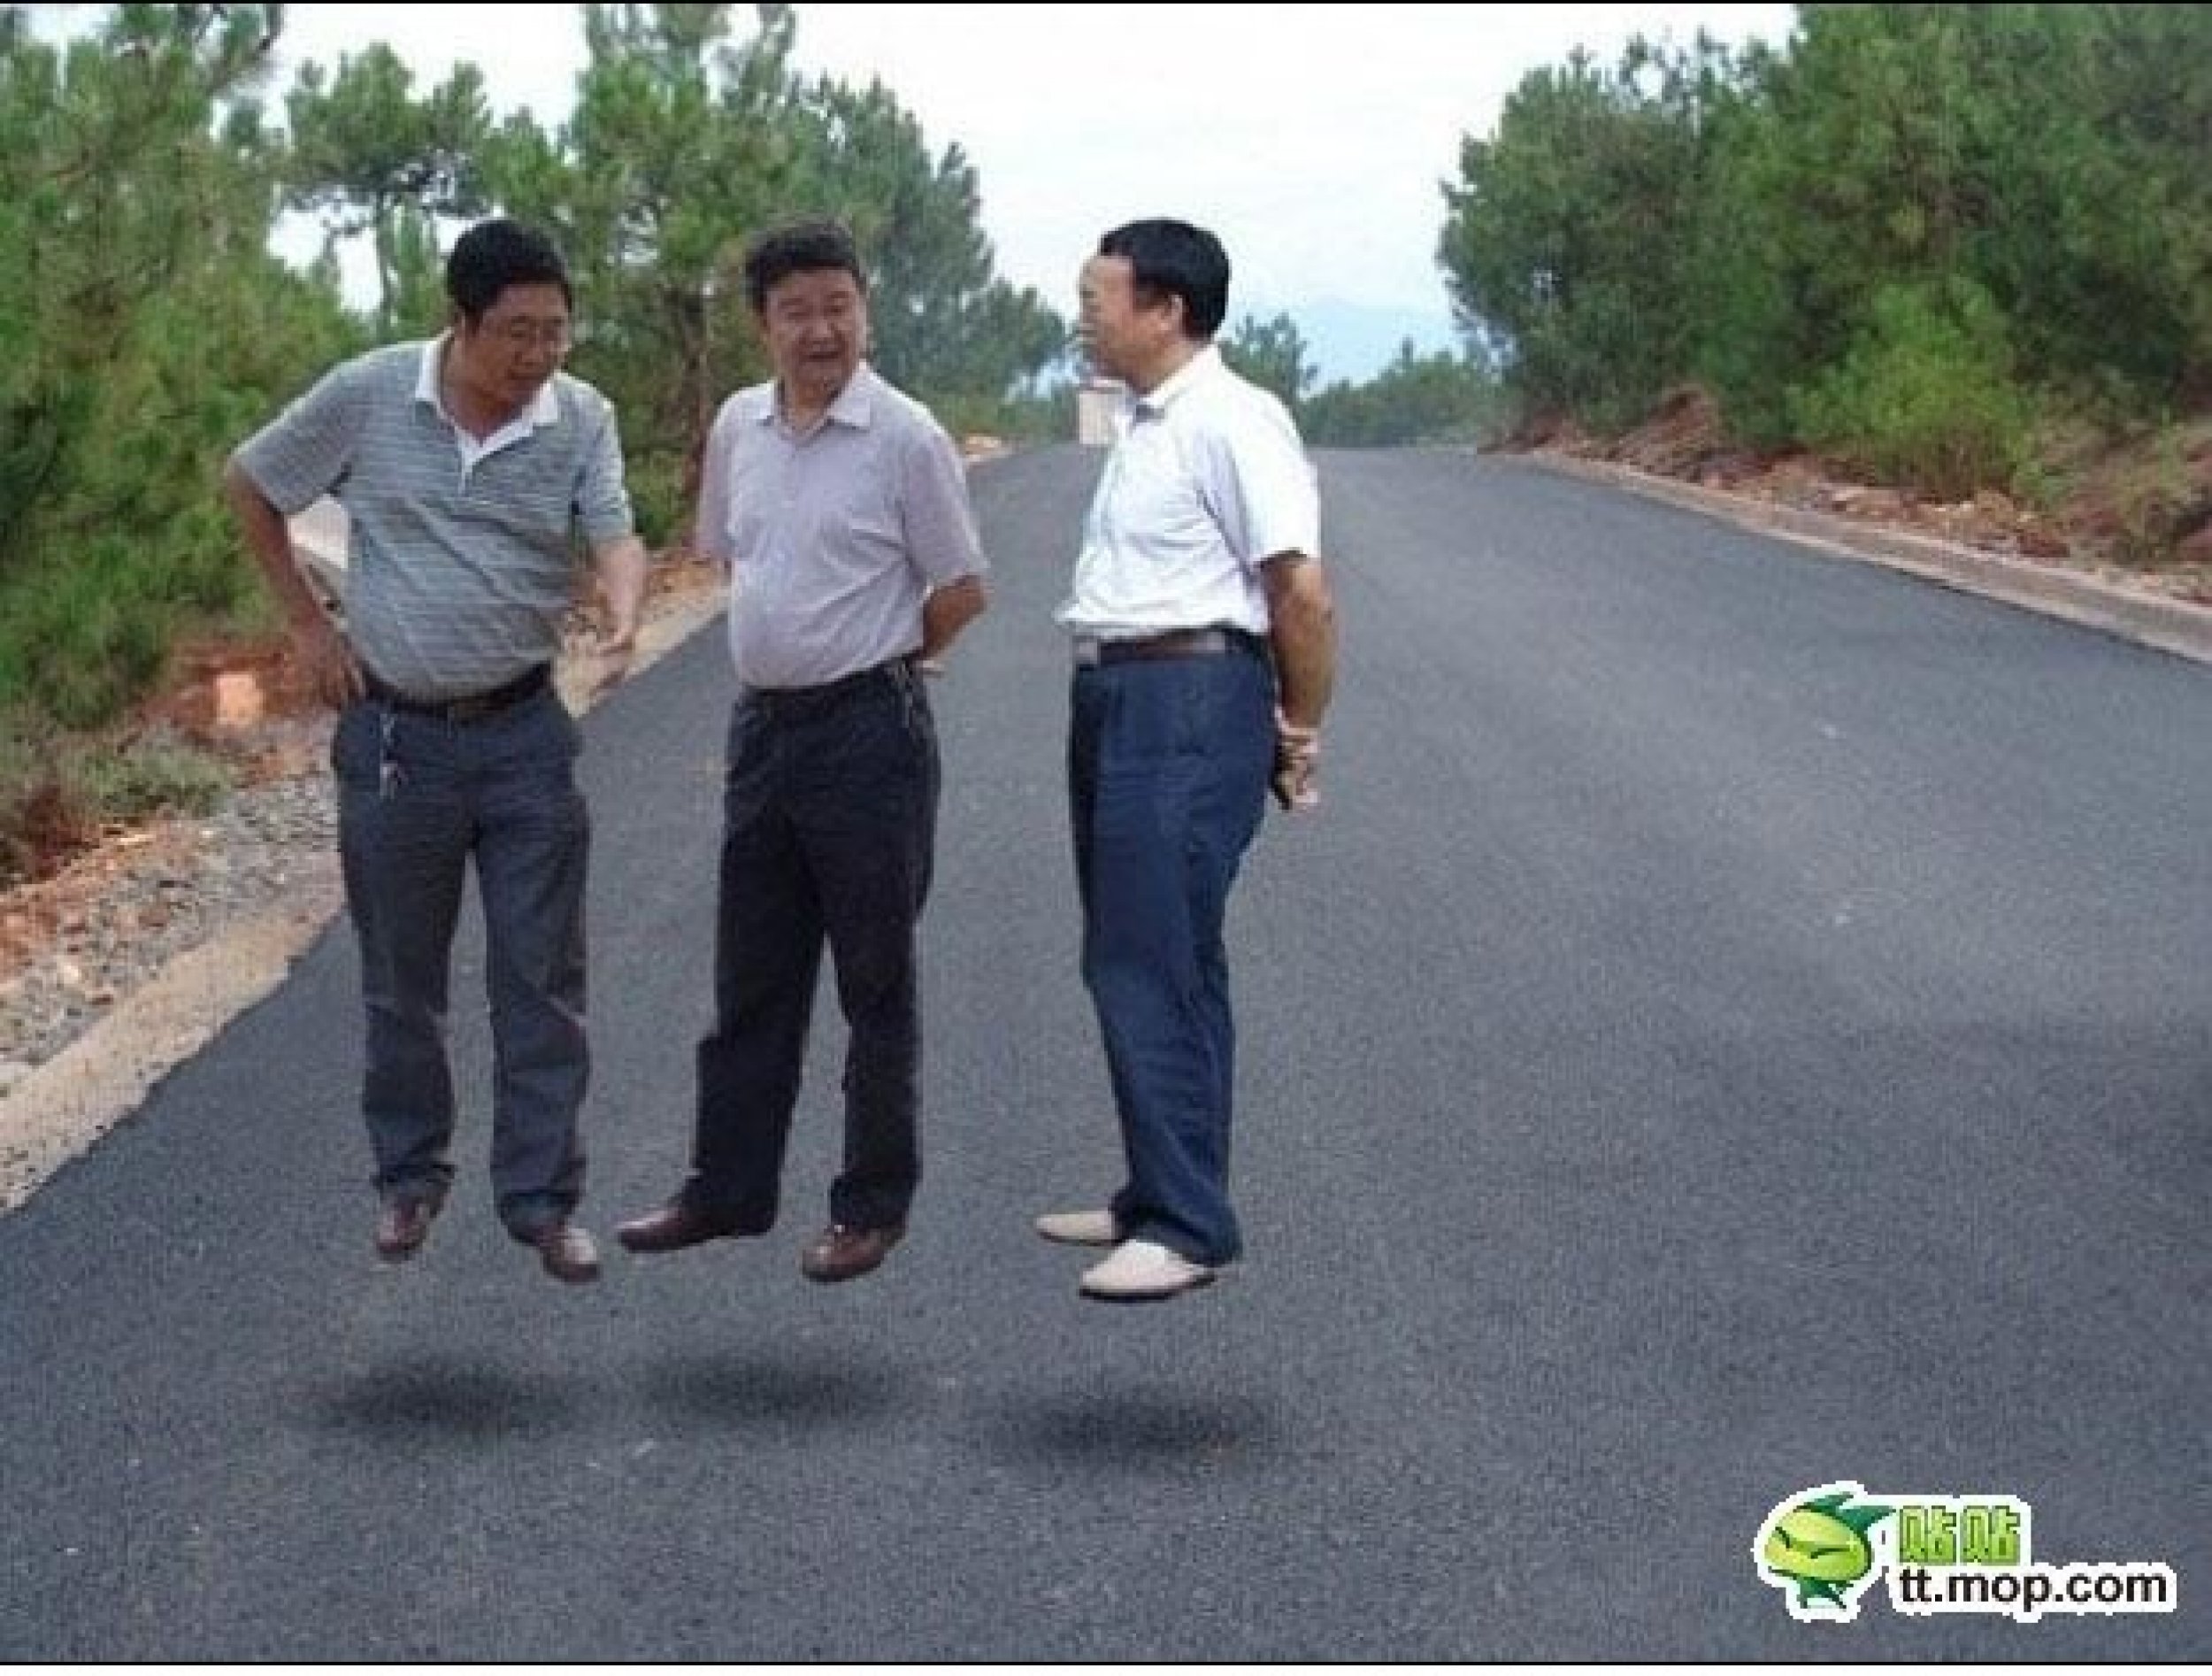 The 3 levitating Chinese government officials.